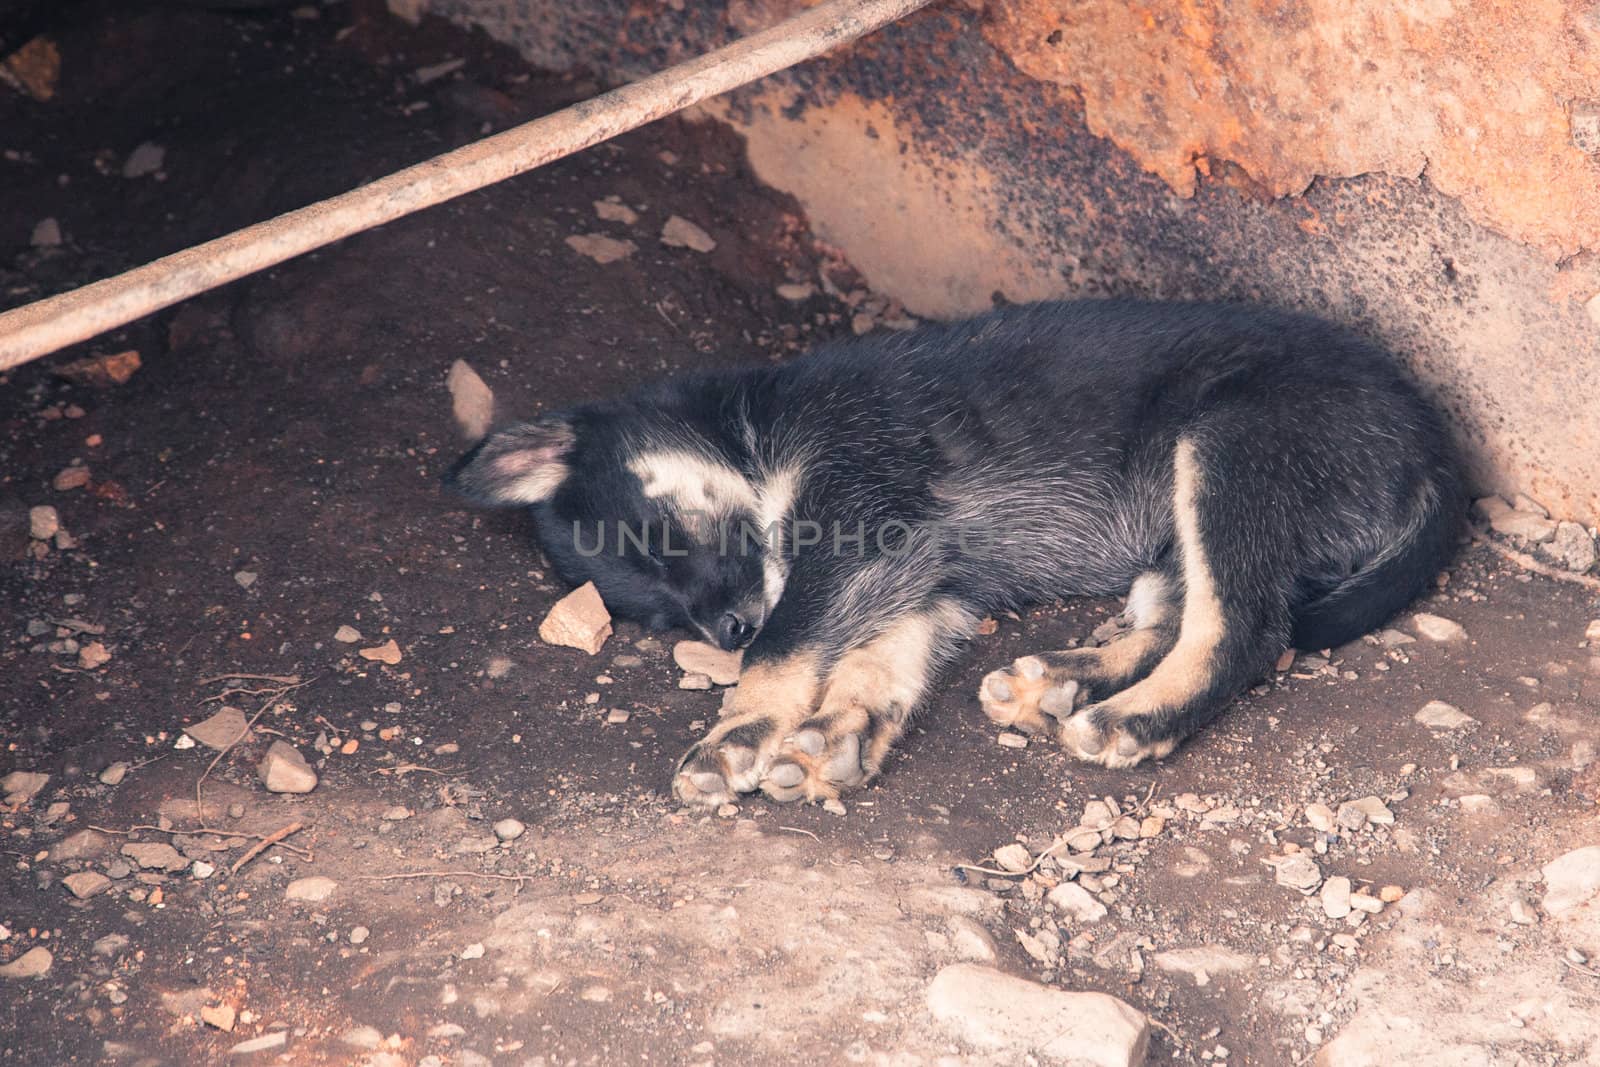 A small Alaskan husky sleeps abandoned in a metal container